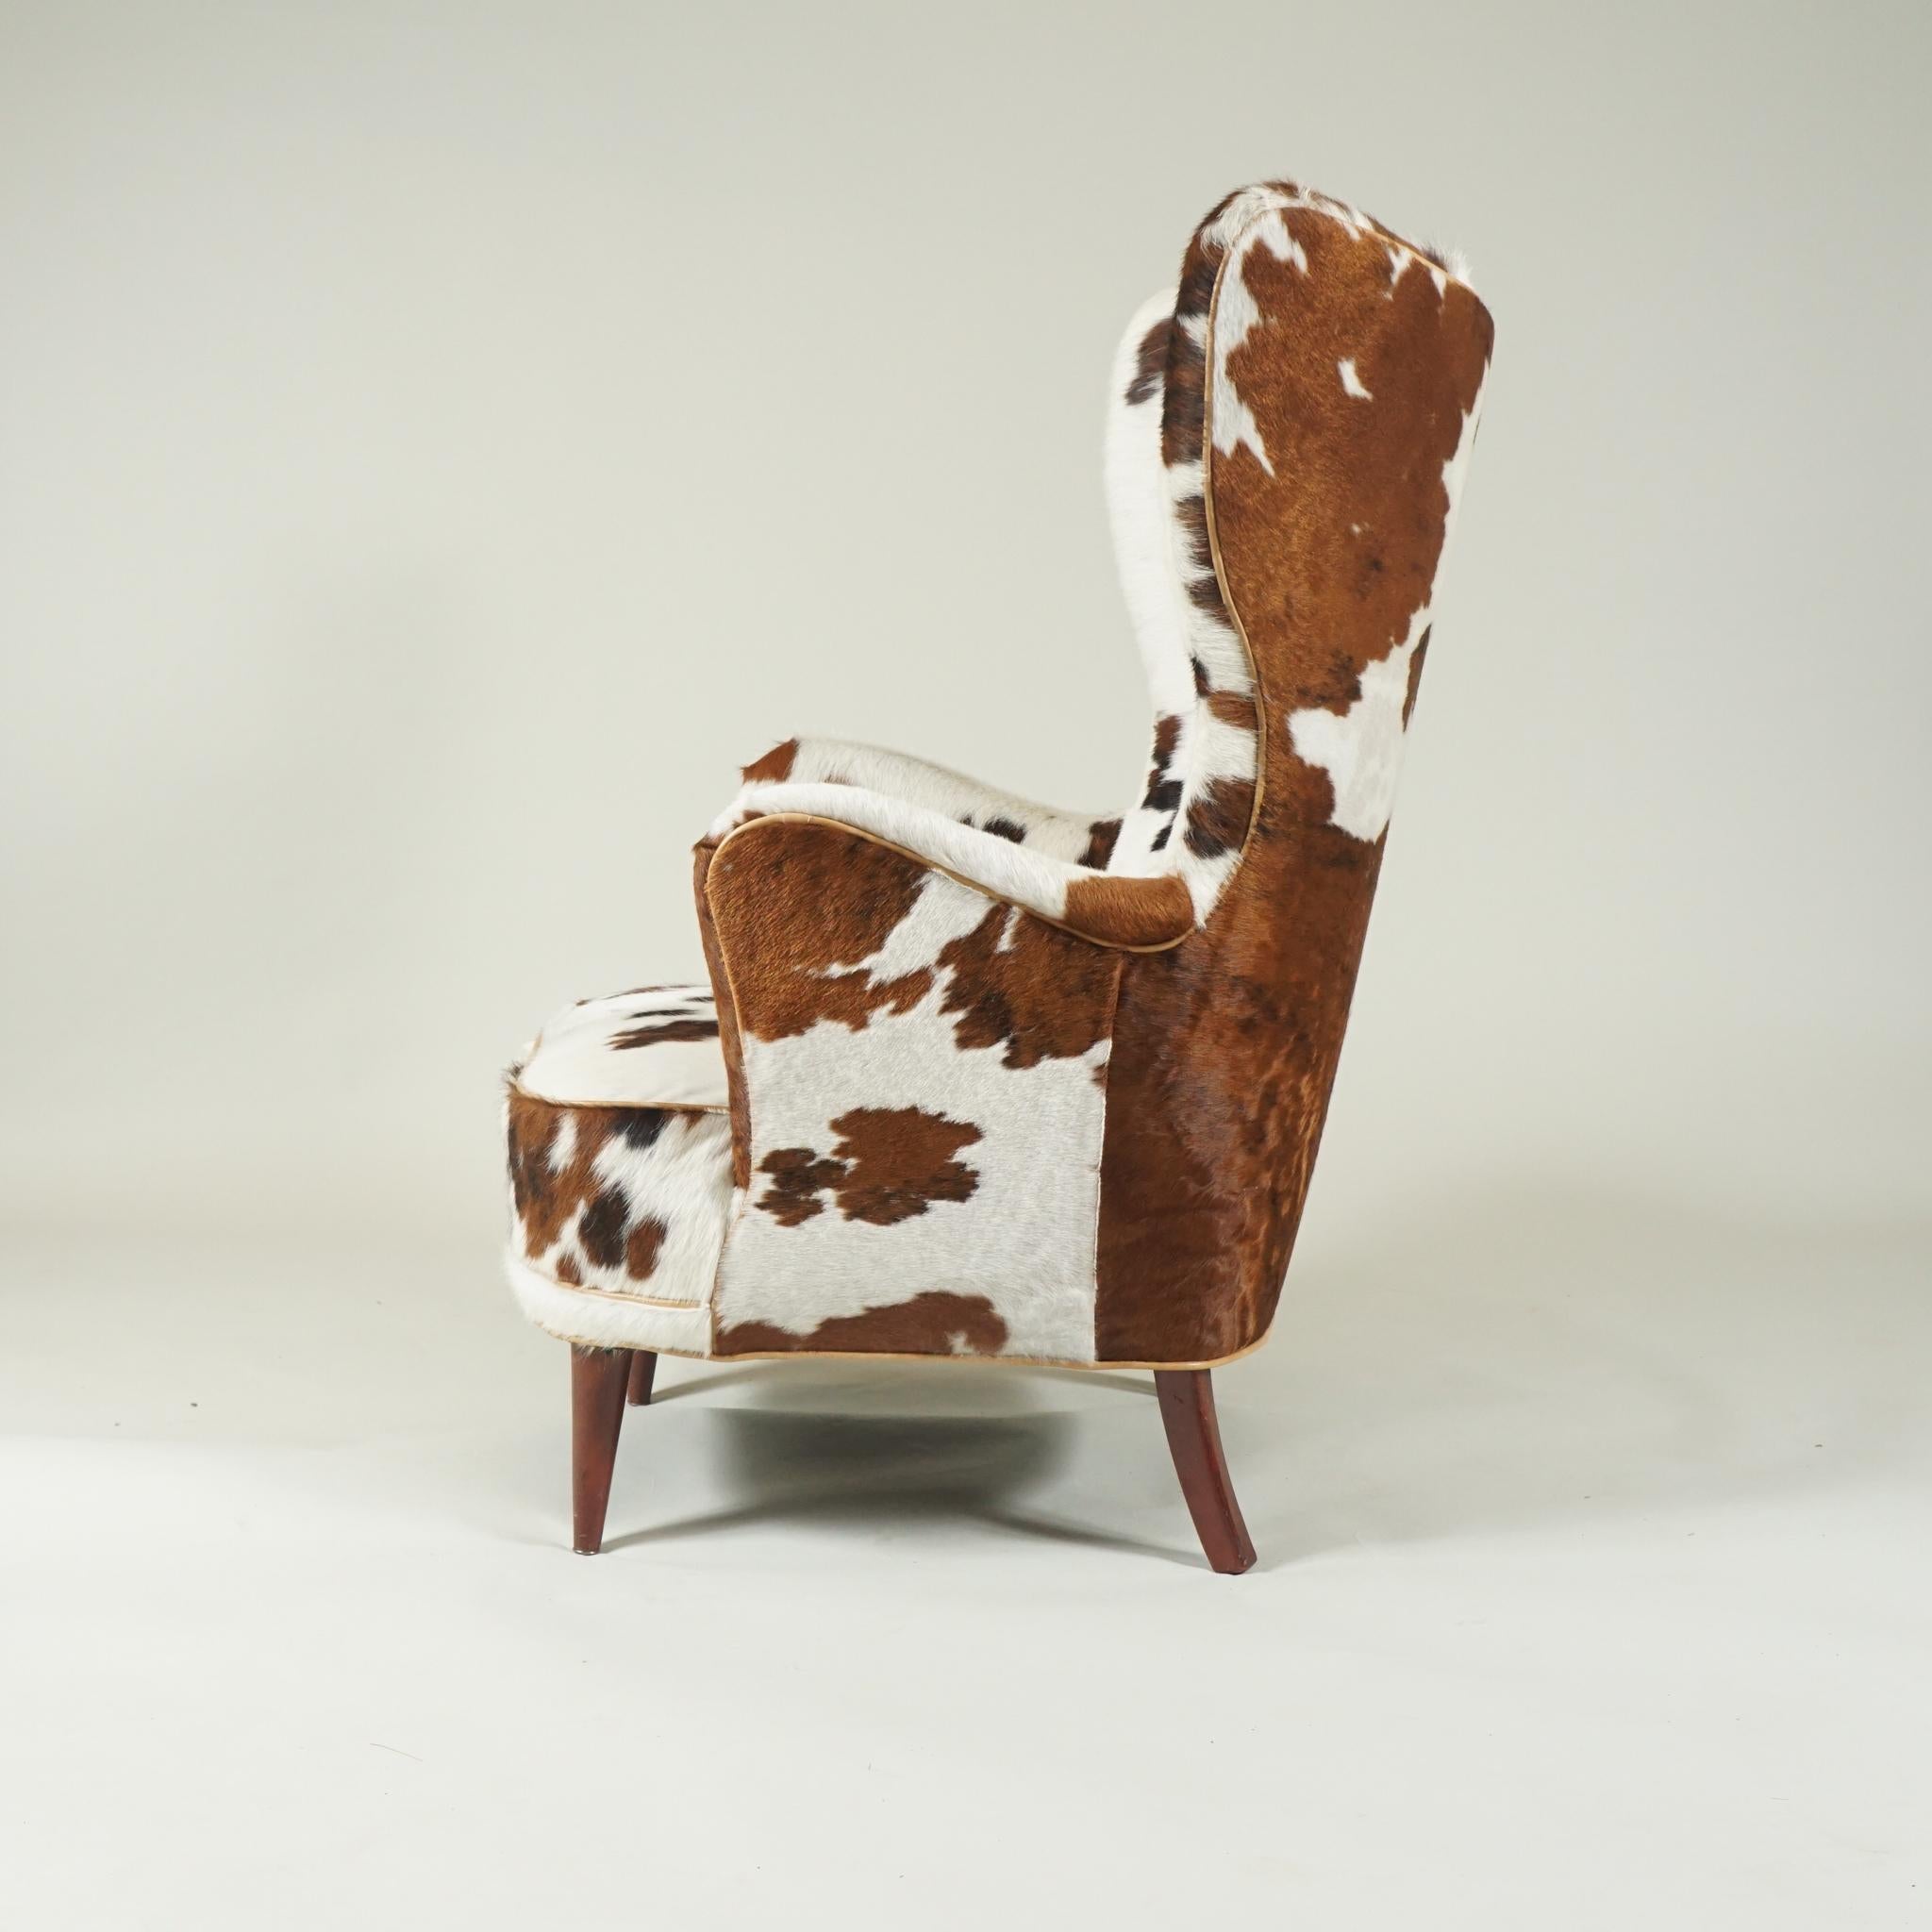 HIgh-backed Danish modern armchair from 1930s, organically shaped for comfort, newly recovered in
a soft brown and off-white cowhide. A new twist on a Classic style.